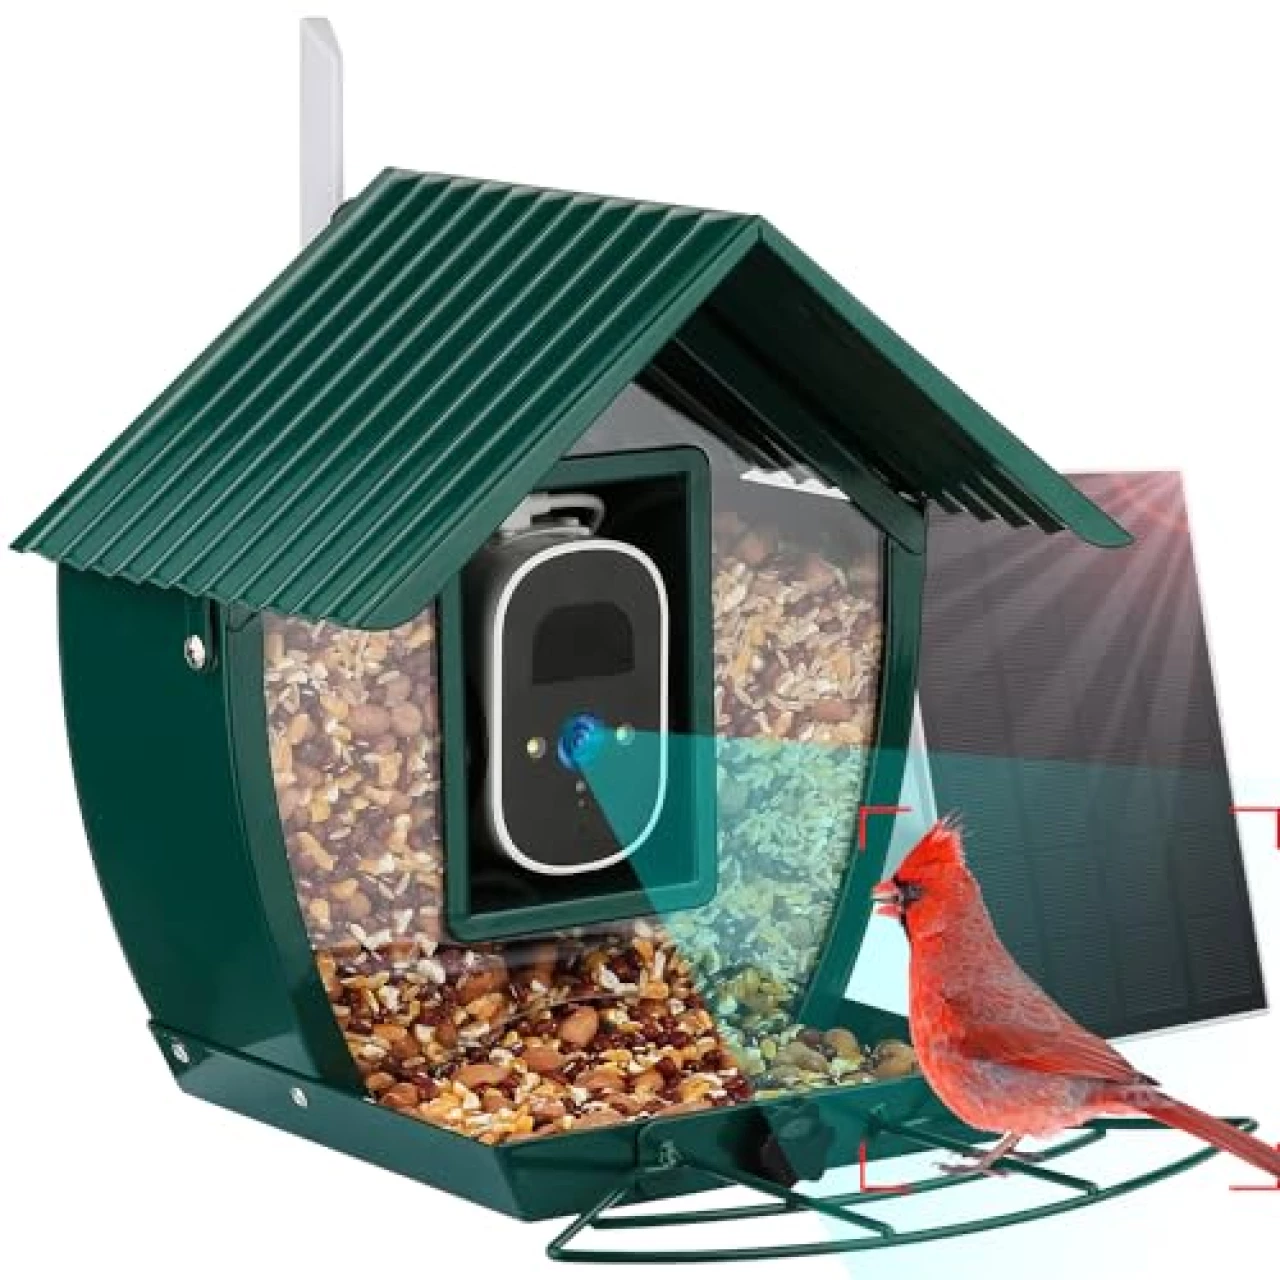 Bird Feeder with Camera, 4MP Smart Bird Feeder with Camera Wireless Outdoor with APP, Solar Powered, Color Night Vision, 10000+ AI Identify Bird Species, Ideal Gift for Bird Lover - Metal Shell